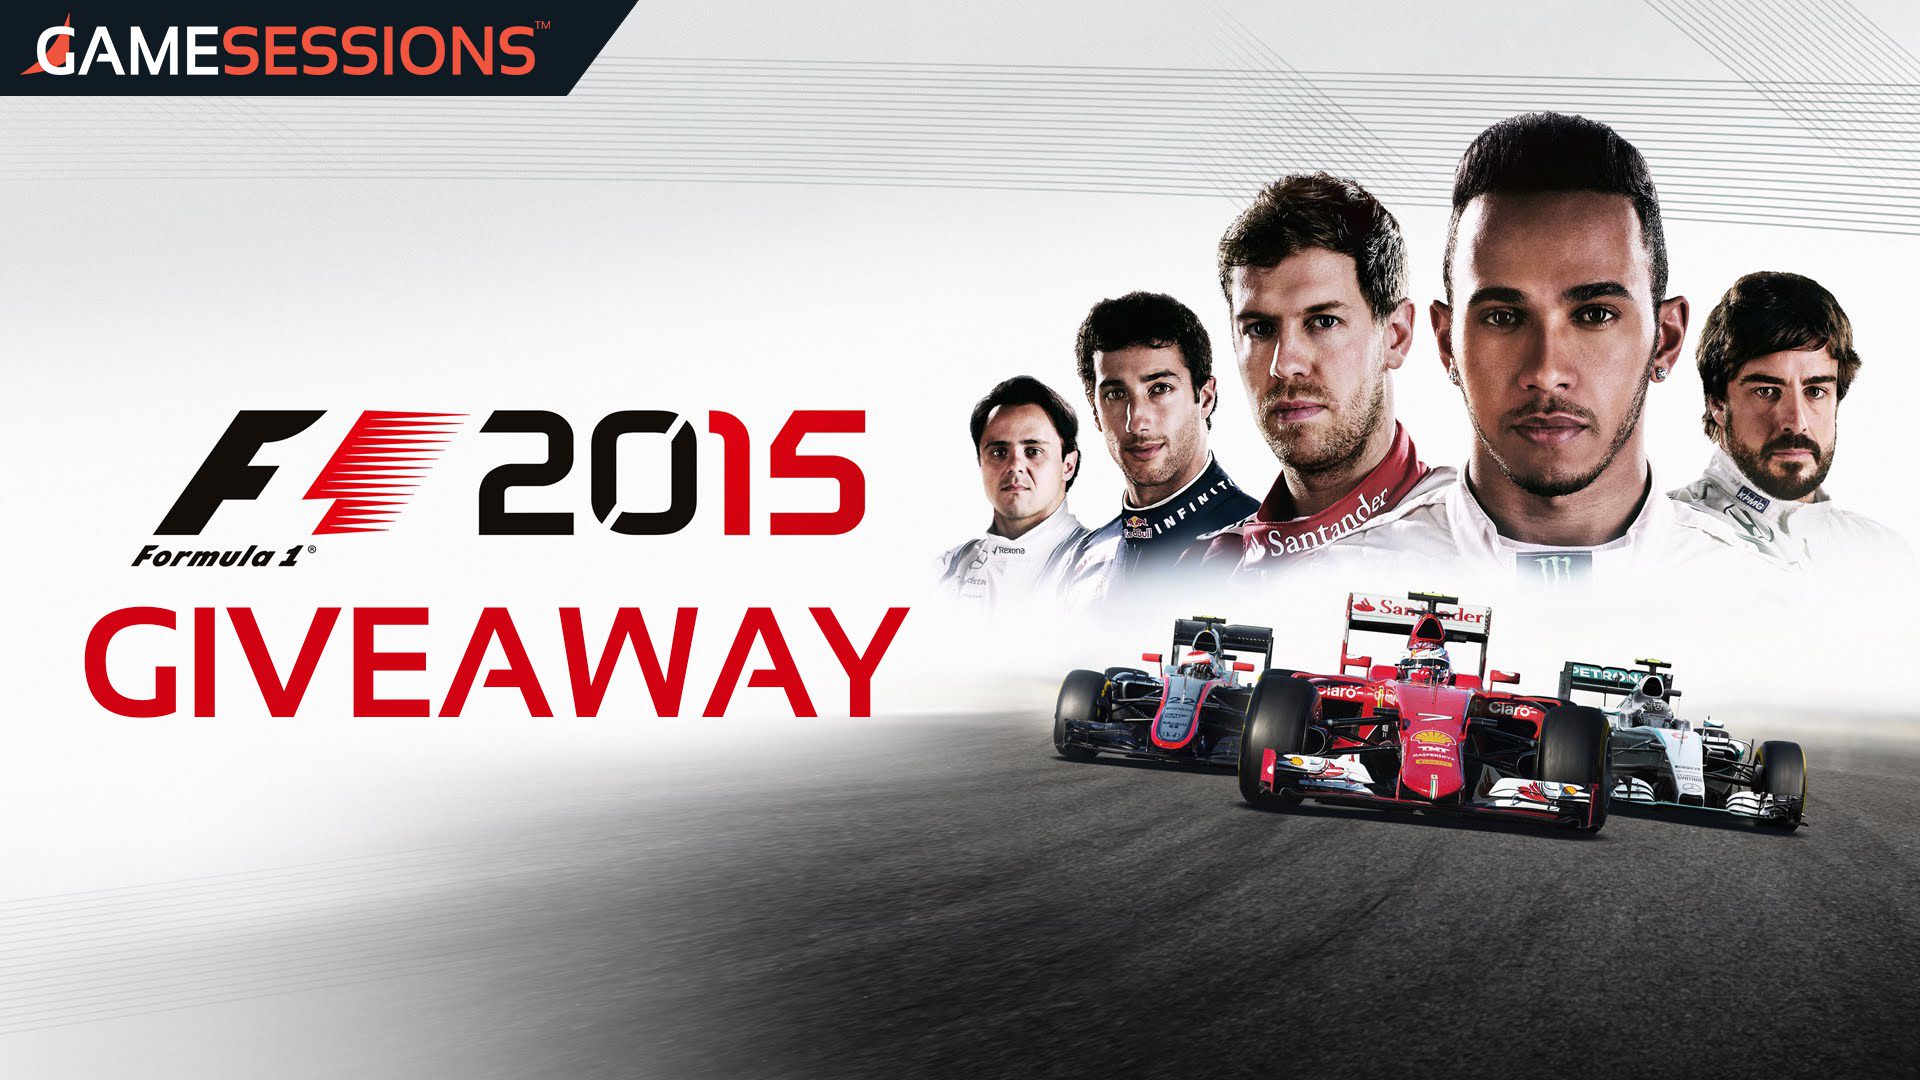 GameSessions offers up F1 2015 free